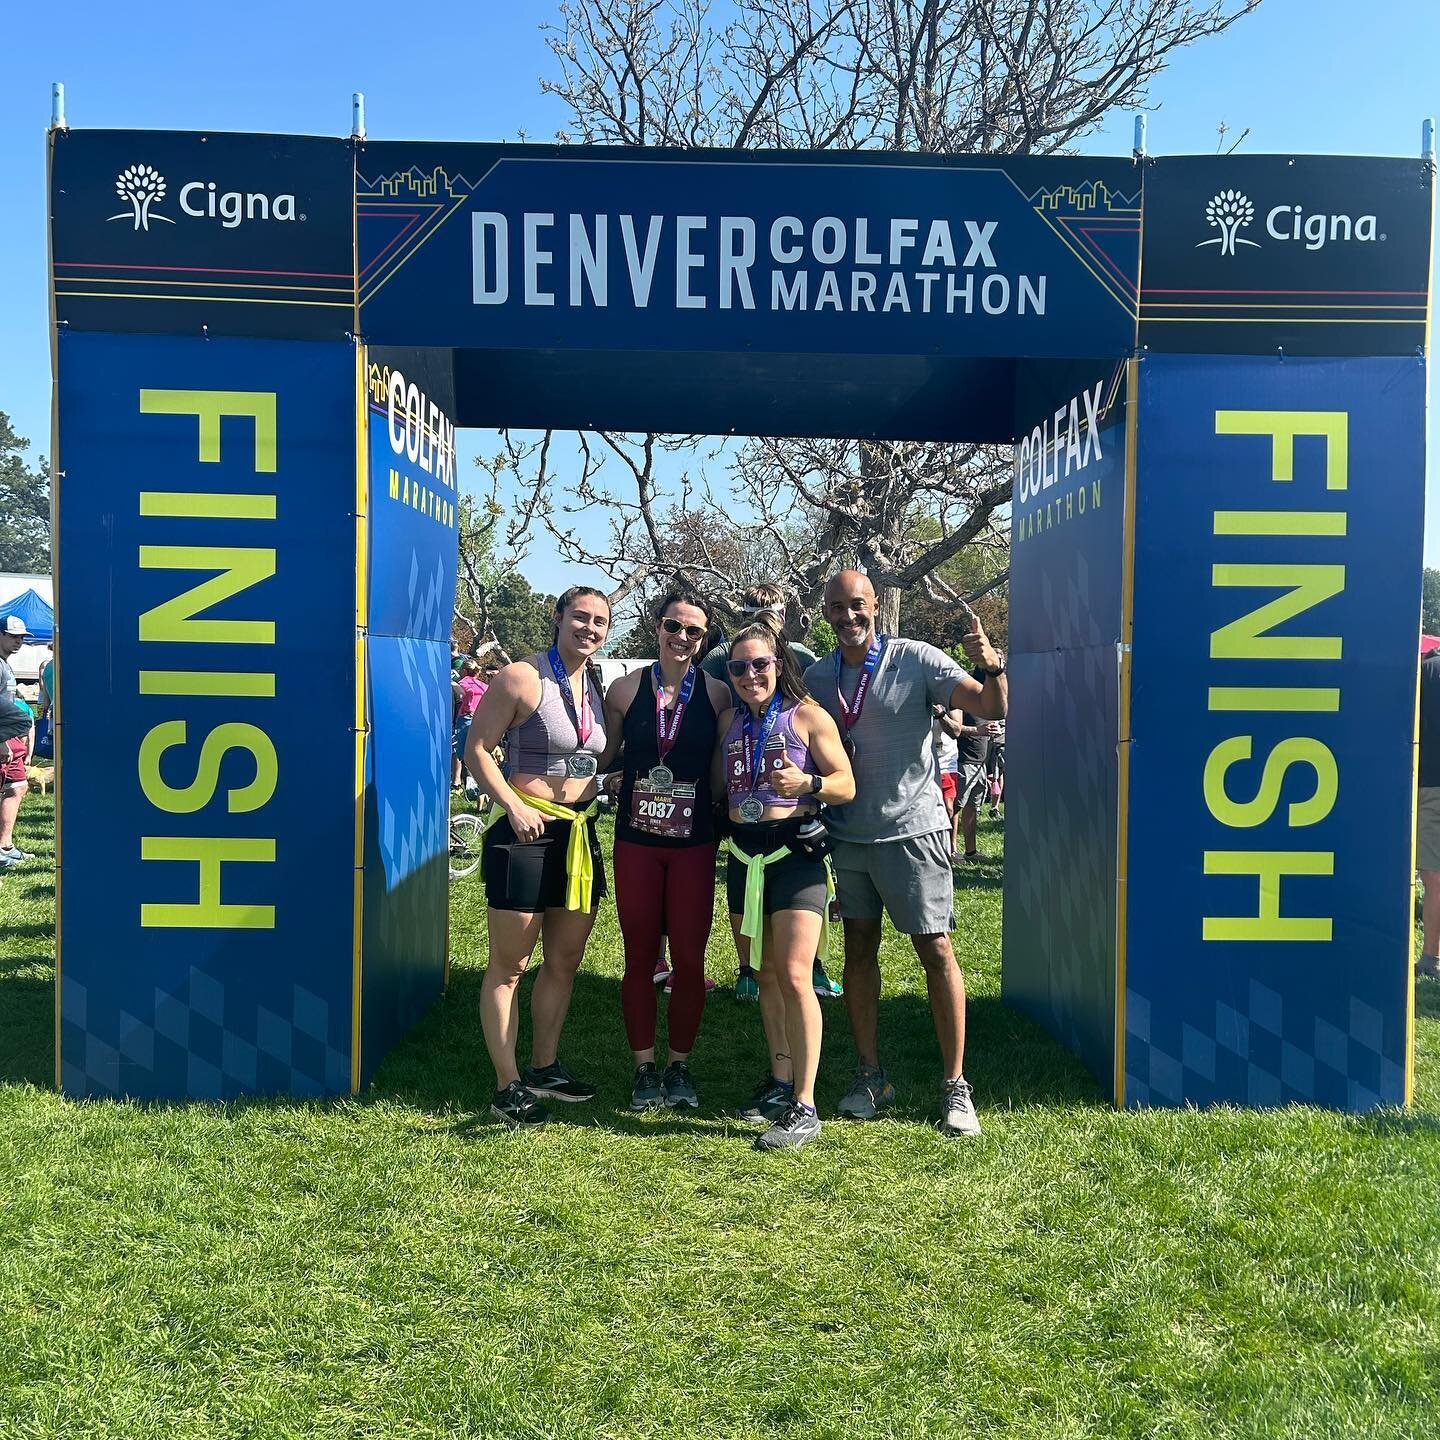 Congratulations to these awesome One Beat Athletes for taking on the Colfax Half Marathon today! 

You all crushed it, and we are so proud!🎉

#weareonebeat #onebeatcrossfit #onebeatfamily #onebeat #onebeatcrossfit #halfmarathon #colfaxhalfmarathon #